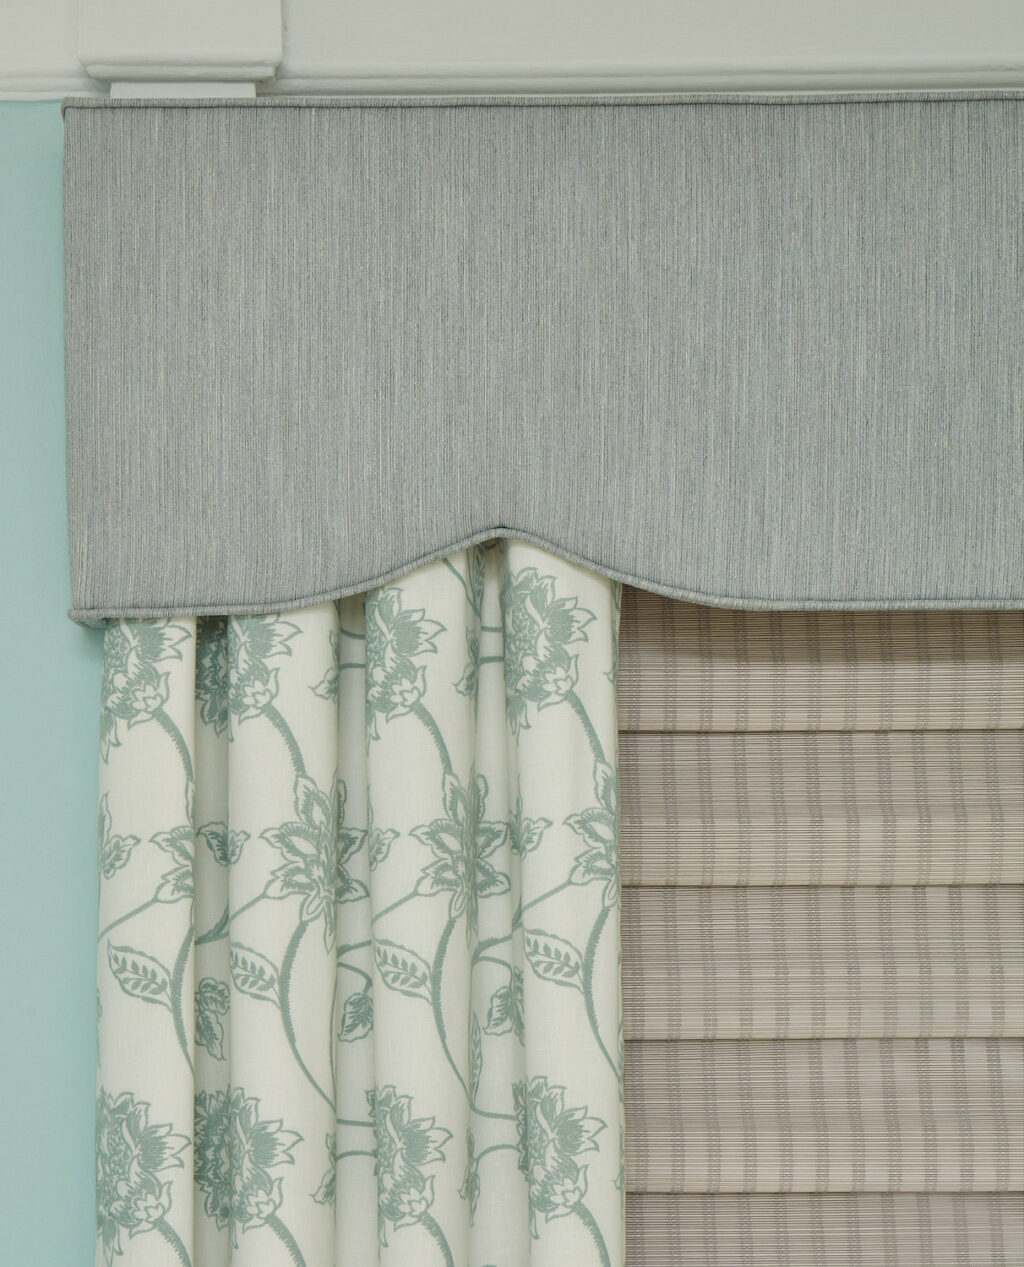 Upholstered Cornices-I